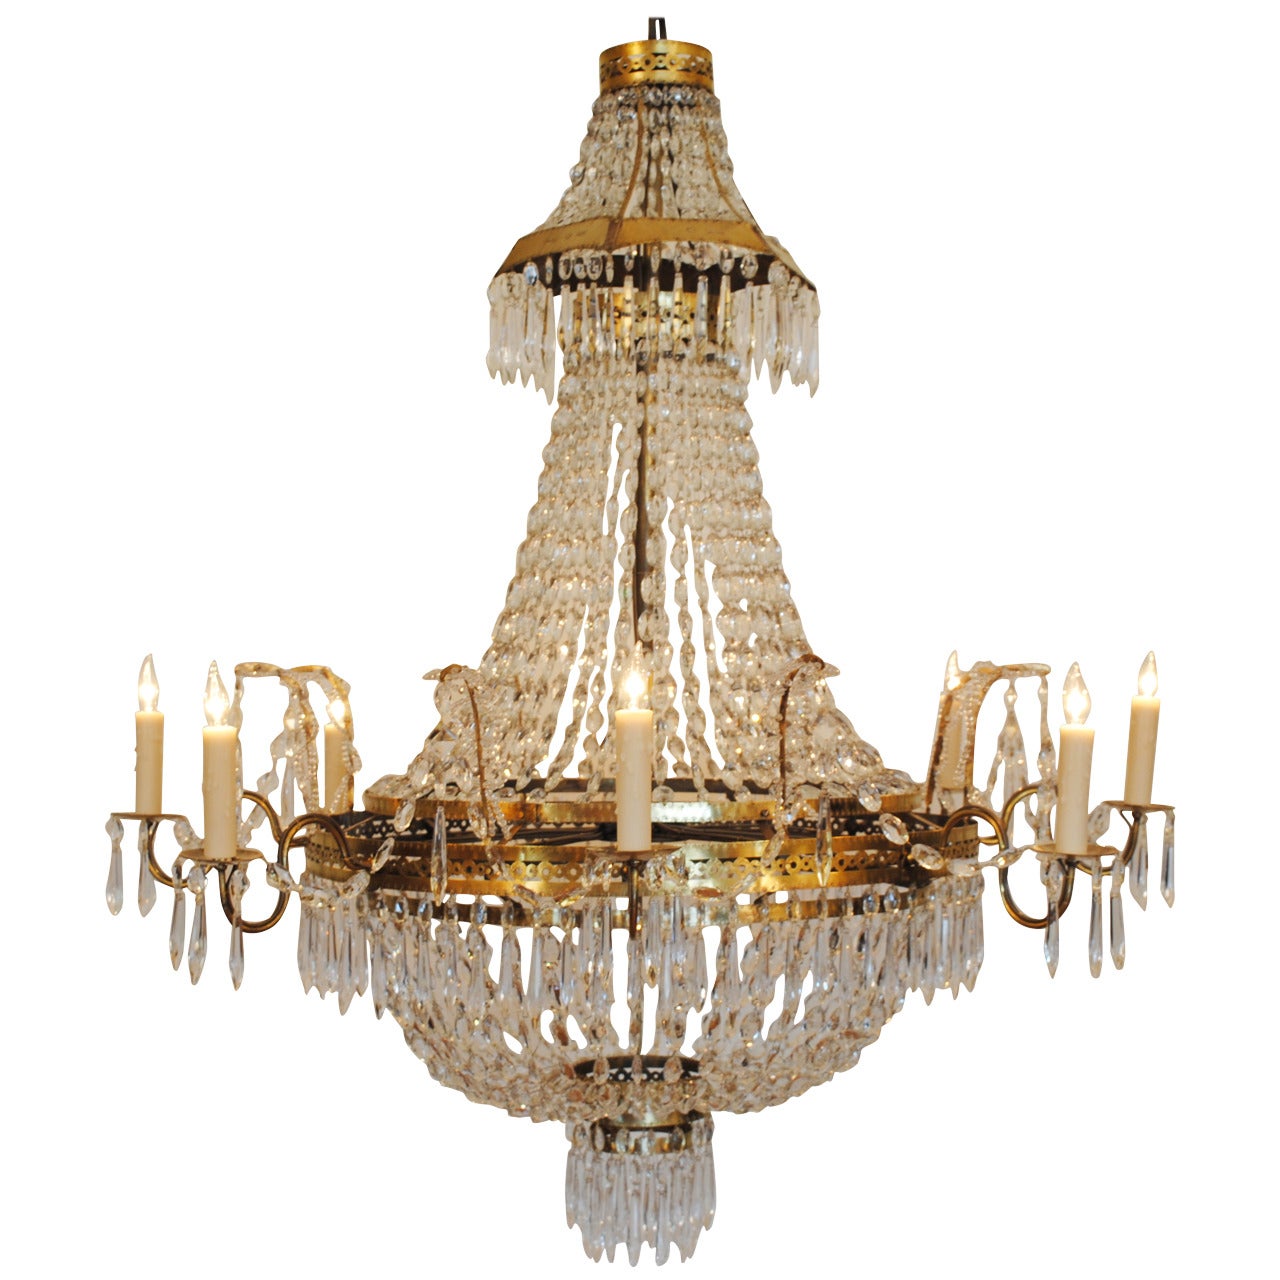 Continental, Possibly Swiss, Incised Brass and Glass Eight-Light Chandelier